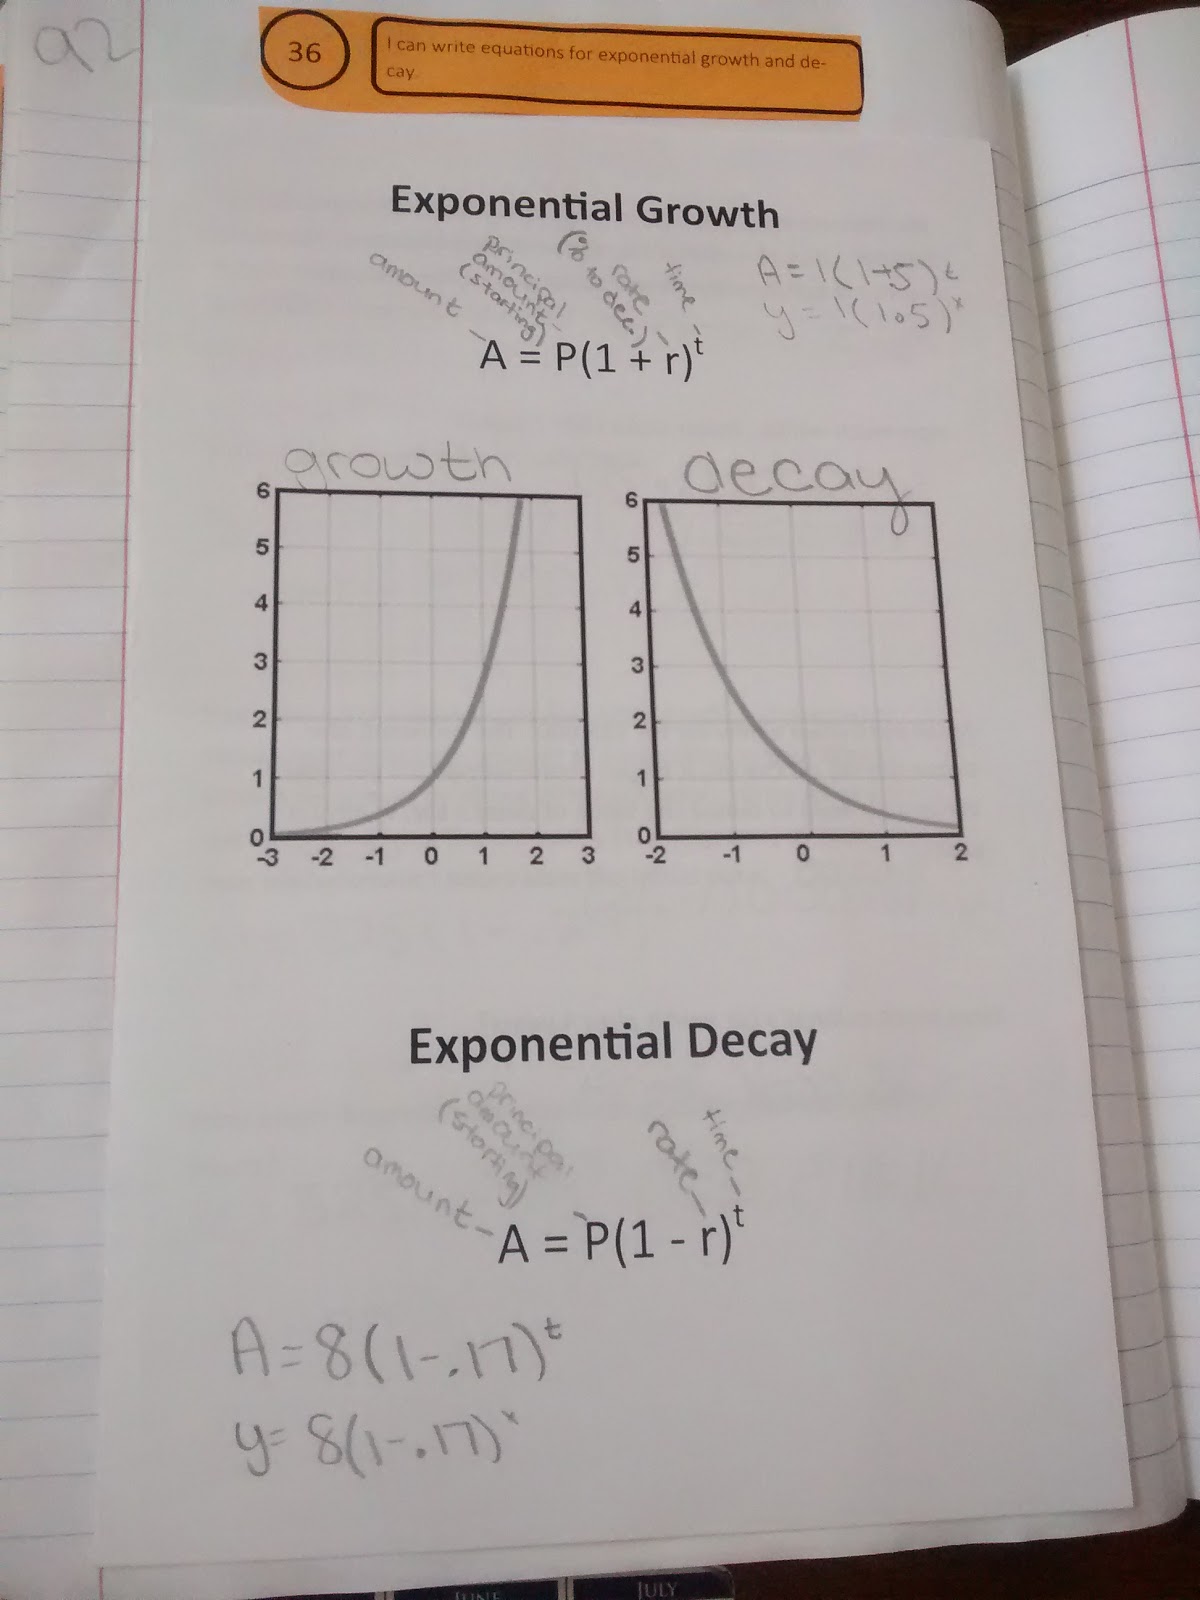 Exponential Growth and Decay Foldable notes. 